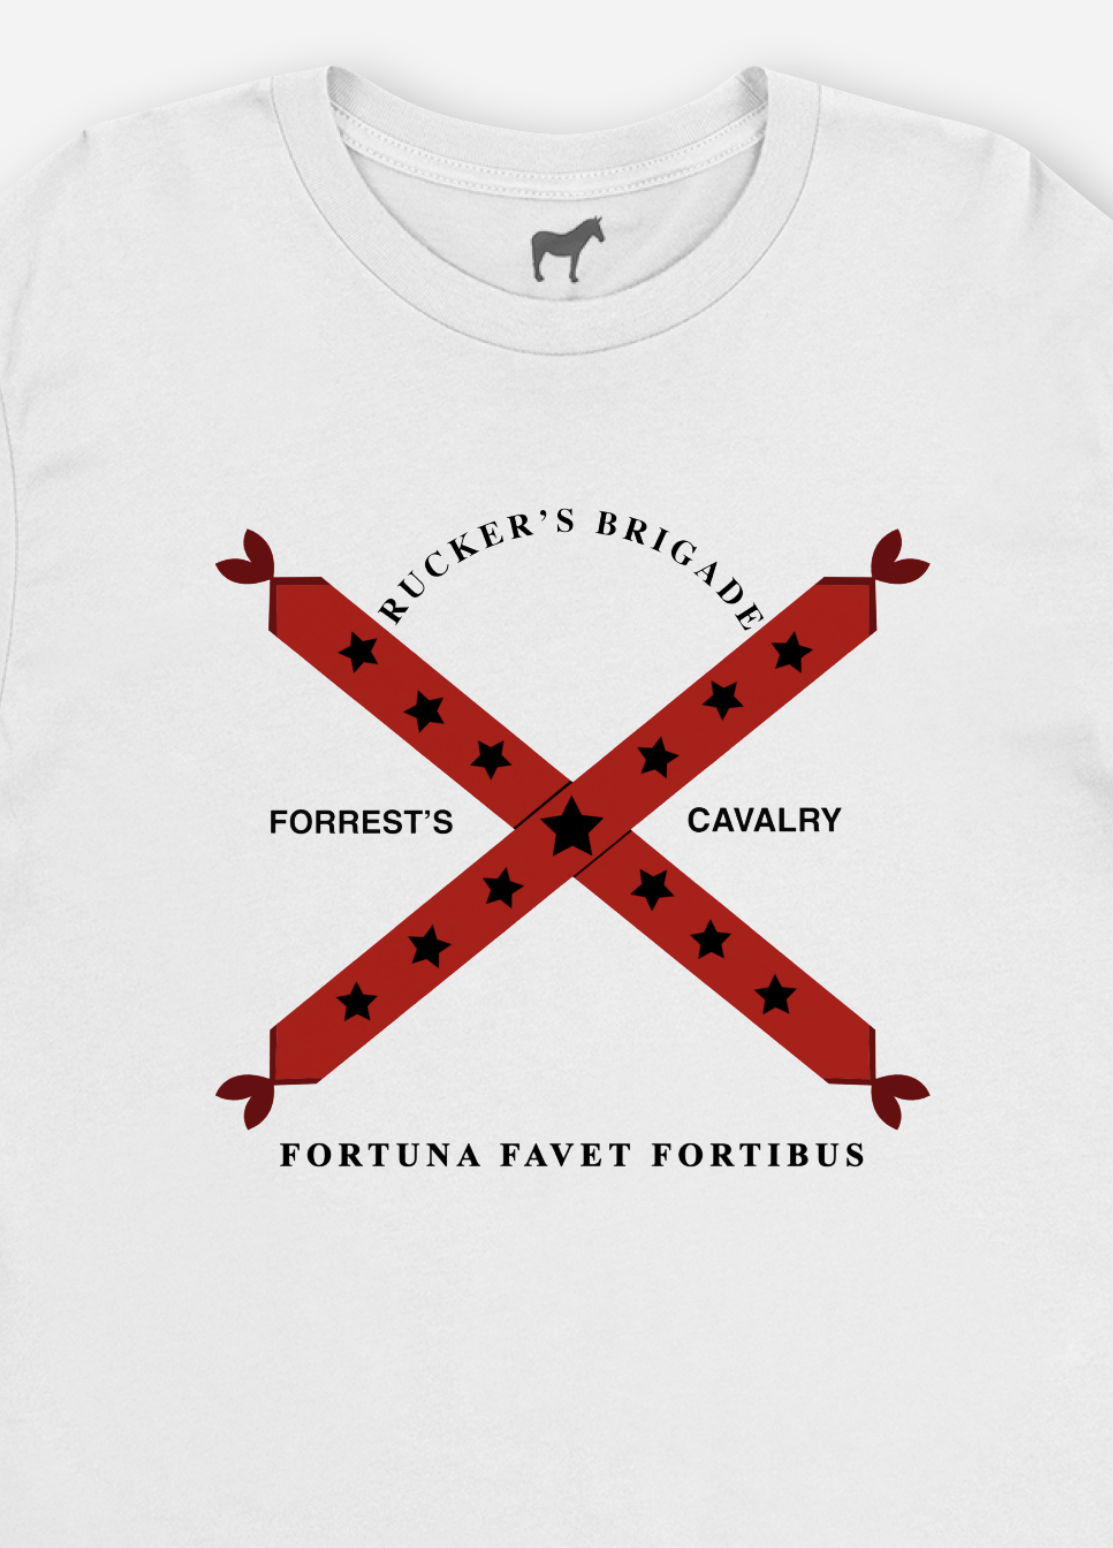 "Fortuna Favet Fortibus" ("Fortune favors the brave") 7th Alabama Cavalry Flag Shirt